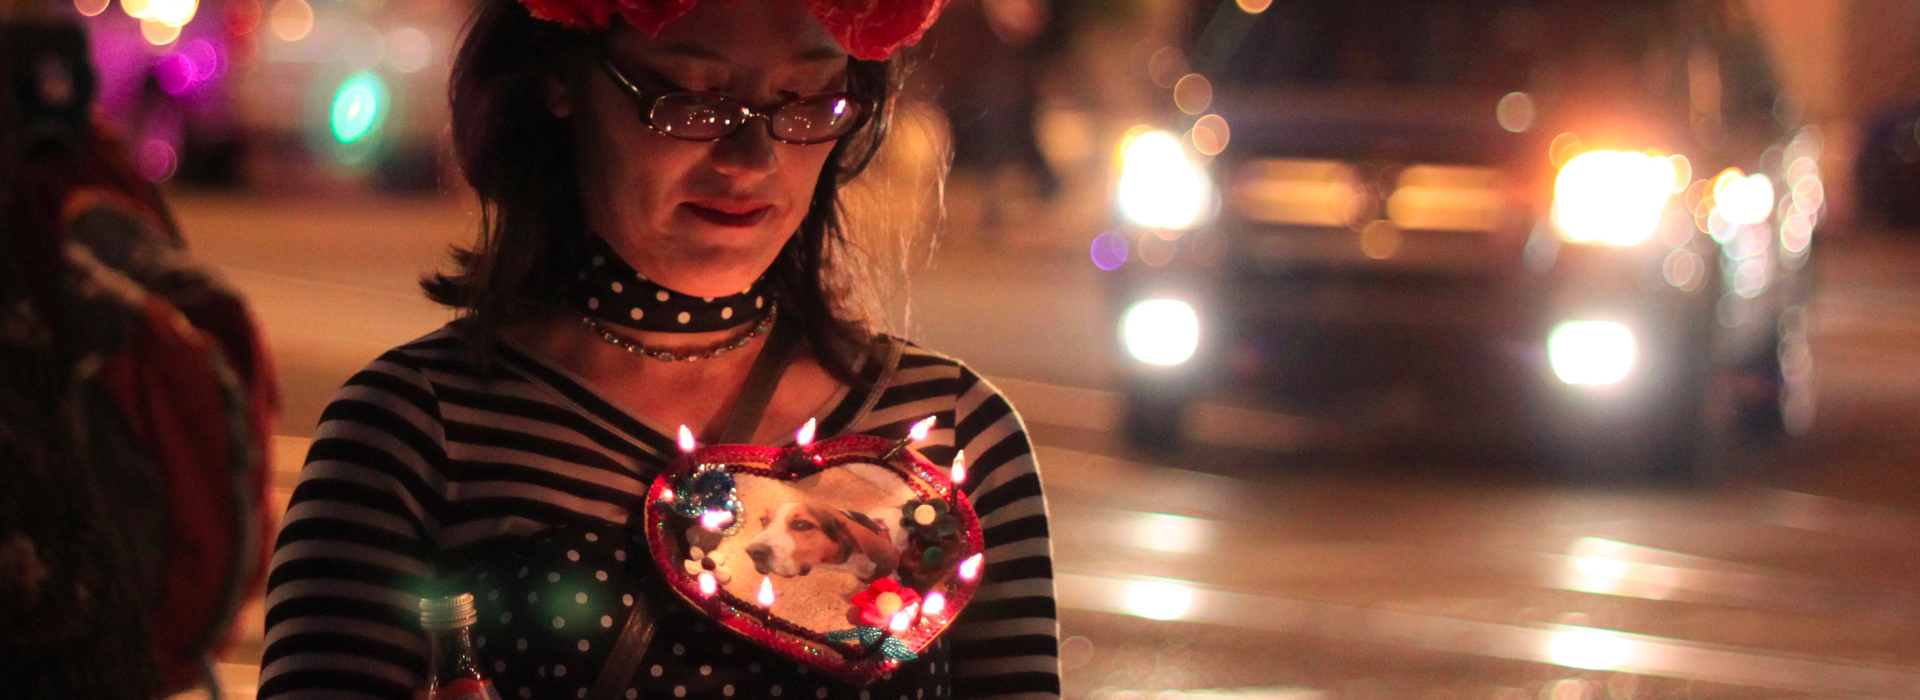 All Souls Attendee with lighted necklace honoring her dog - face illuminated by her cellphone